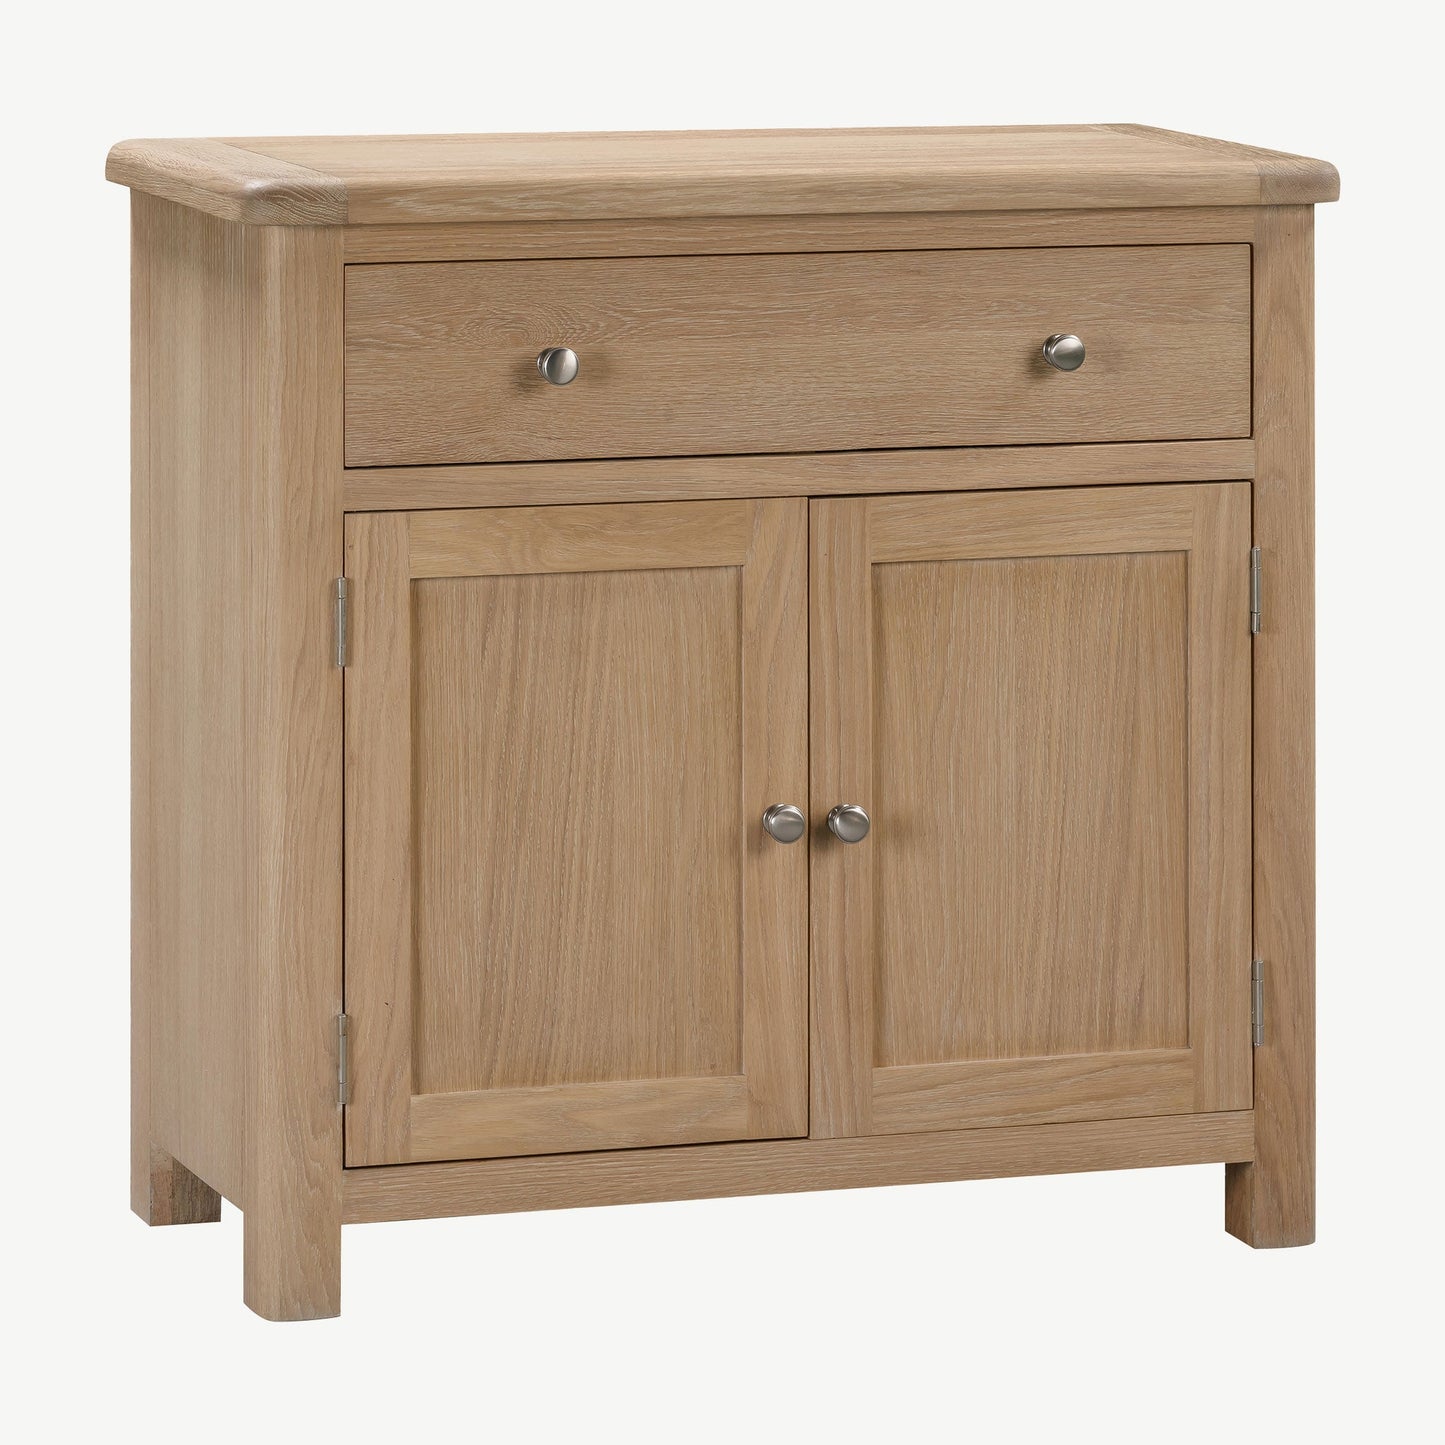 Turnberry Compact Sideboard